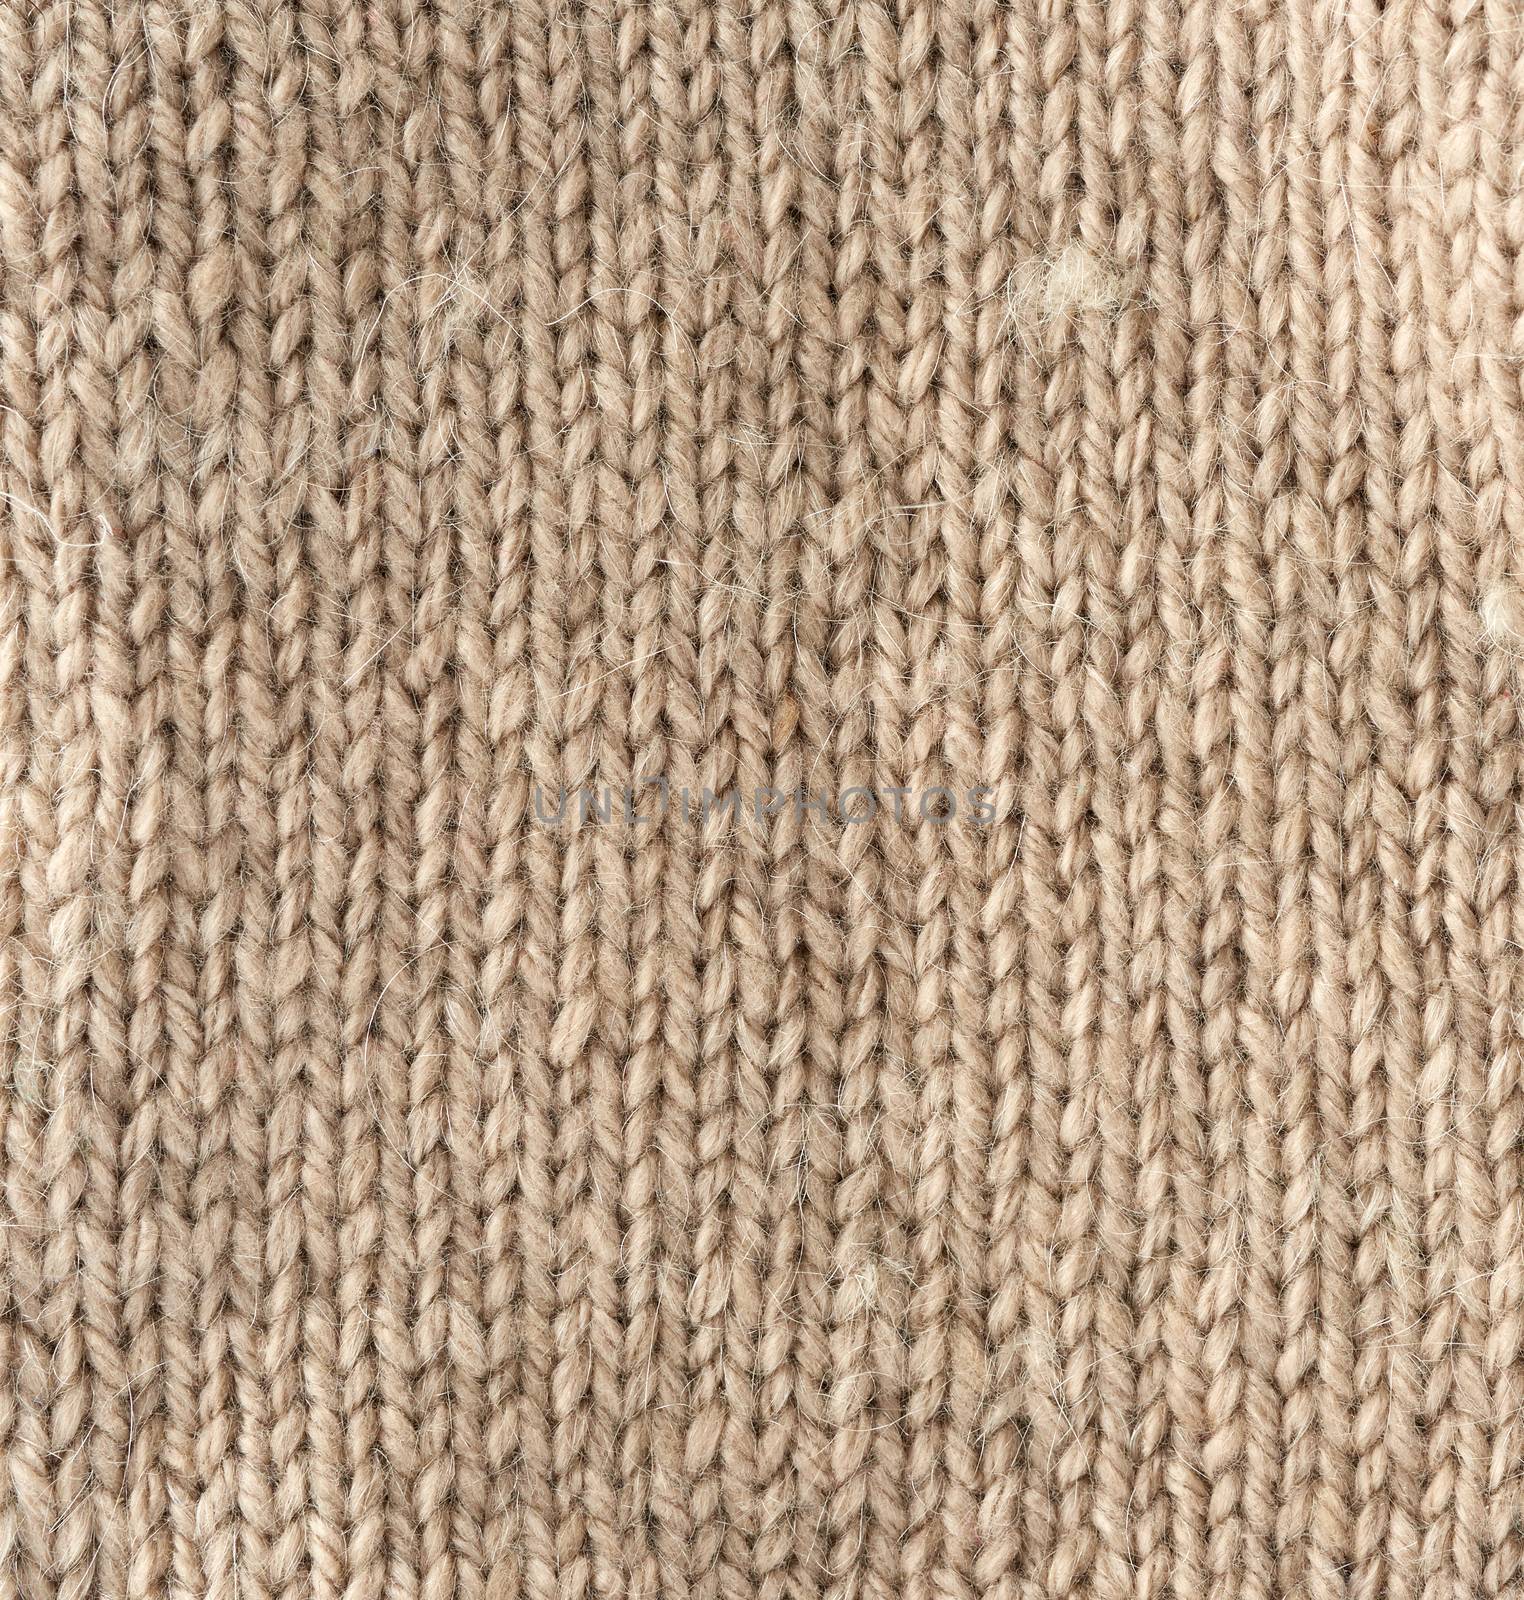 fragment of knitted fabric from light brown wool of a sheep by ndanko